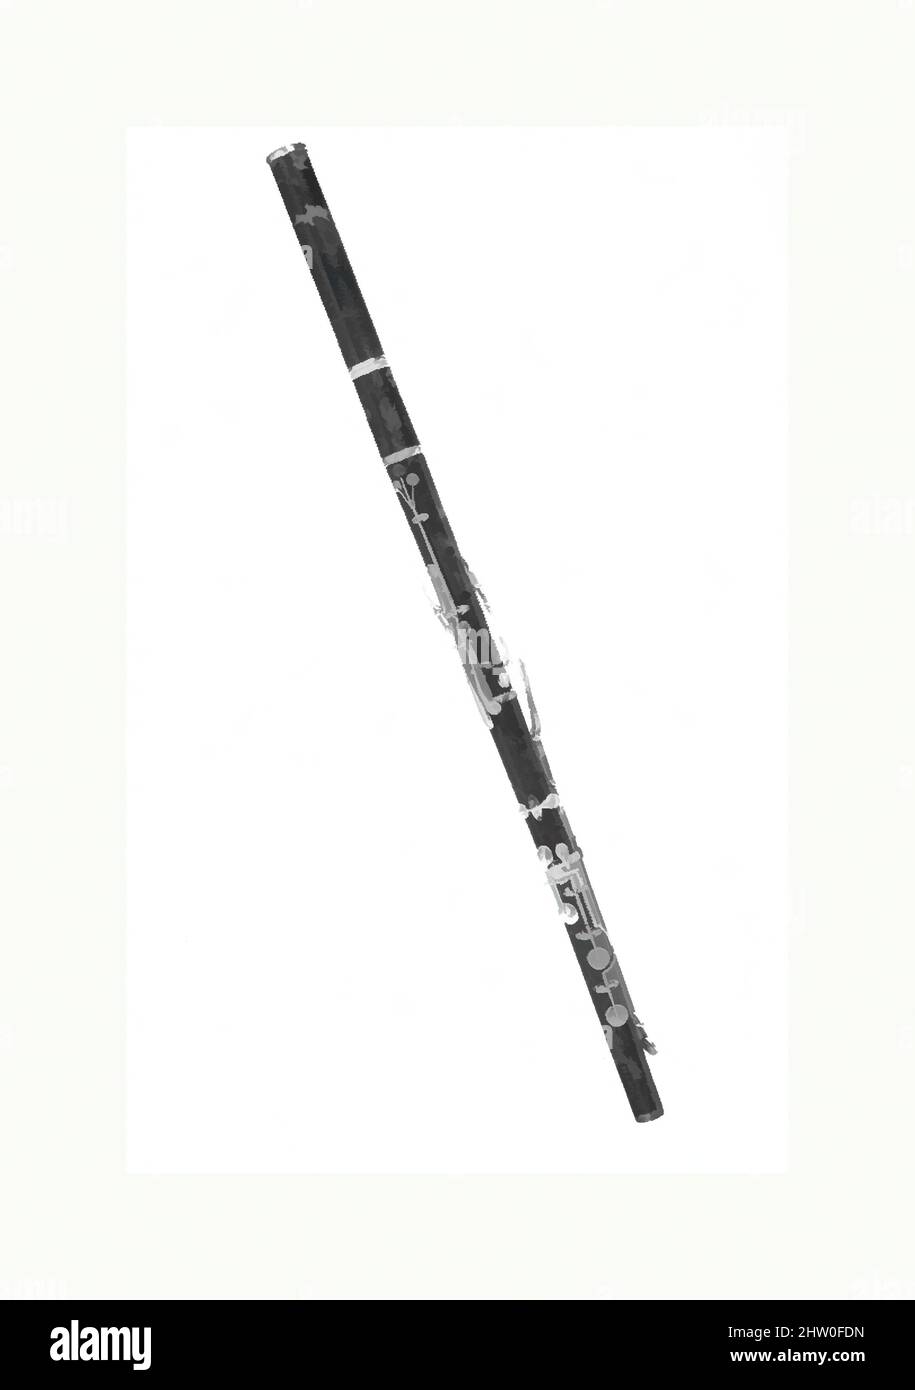 Art inspired by Transverse Flute in B, 1856–90, New York, United States, American, Wood, tortoiseshell, silver, Height: 27 1/16 in. (68.8 cm), Aerophone-Blow Hole-side-blown flute (transverse, Classic works modernized by Artotop with a splash of modernity. Shapes, color and value, eye-catching visual impact on art. Emotions through freedom of artworks in a contemporary way. A timeless message pursuing a wildly creative new direction. Artists turning to the digital medium and creating the Artotop NFT Stock Photo